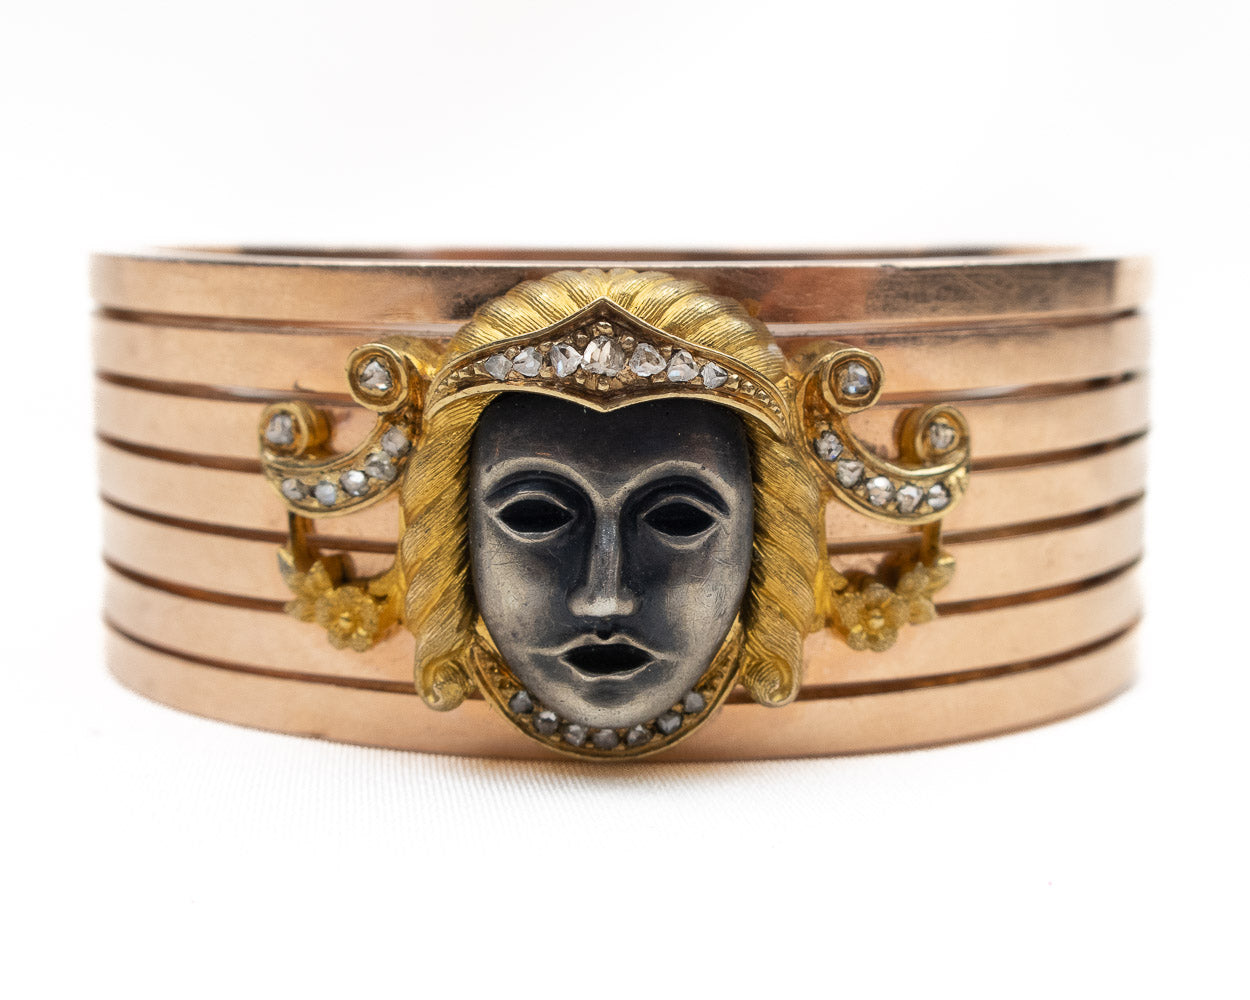 Victorian Bangle with Ornate Mask